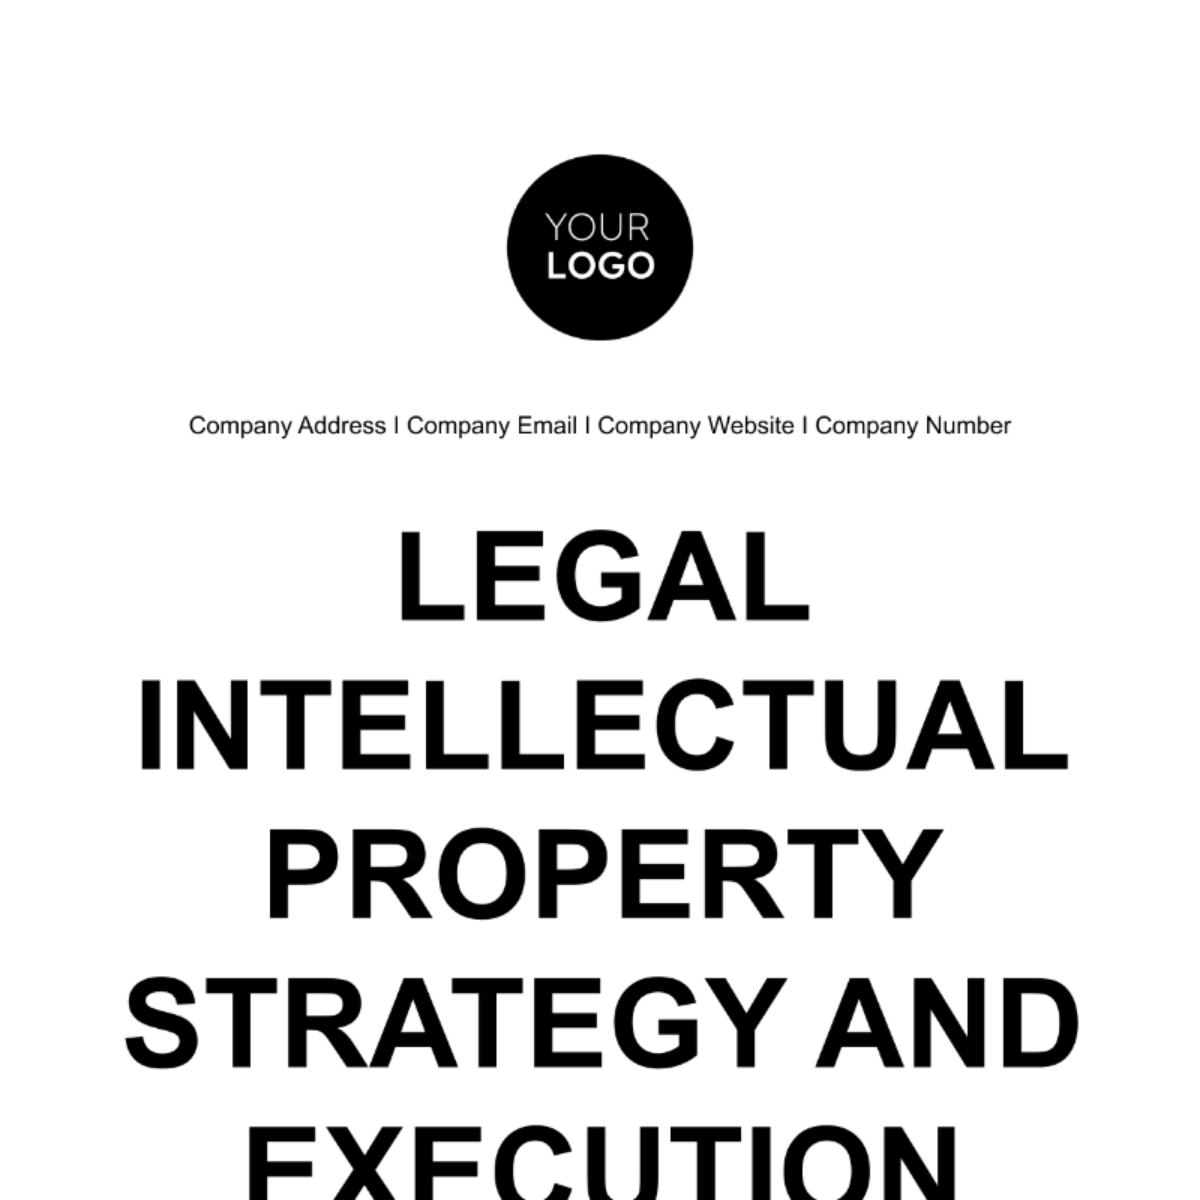 Free Legal Intellectual Property Strategy and Execution Plan Template